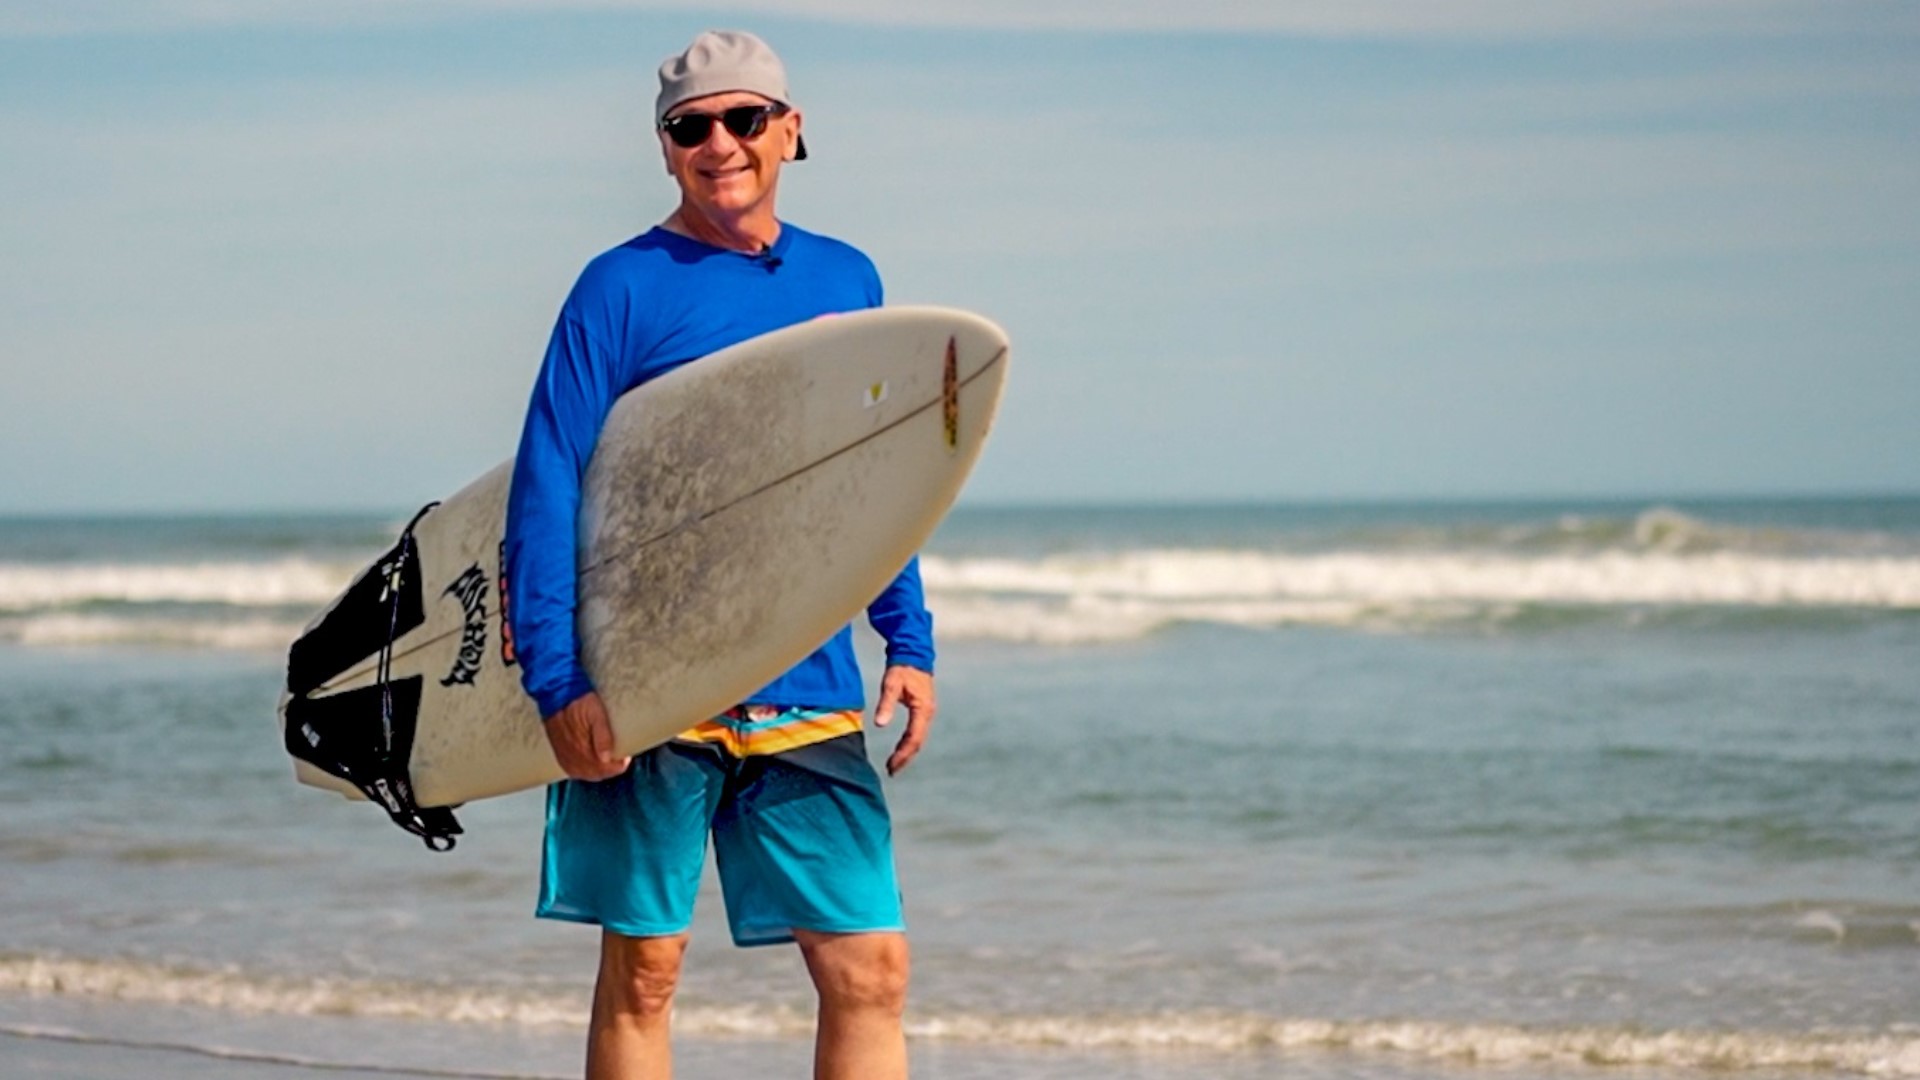 Cocoa Beach is the surf capital of the east coast and the small wave capital of the world.